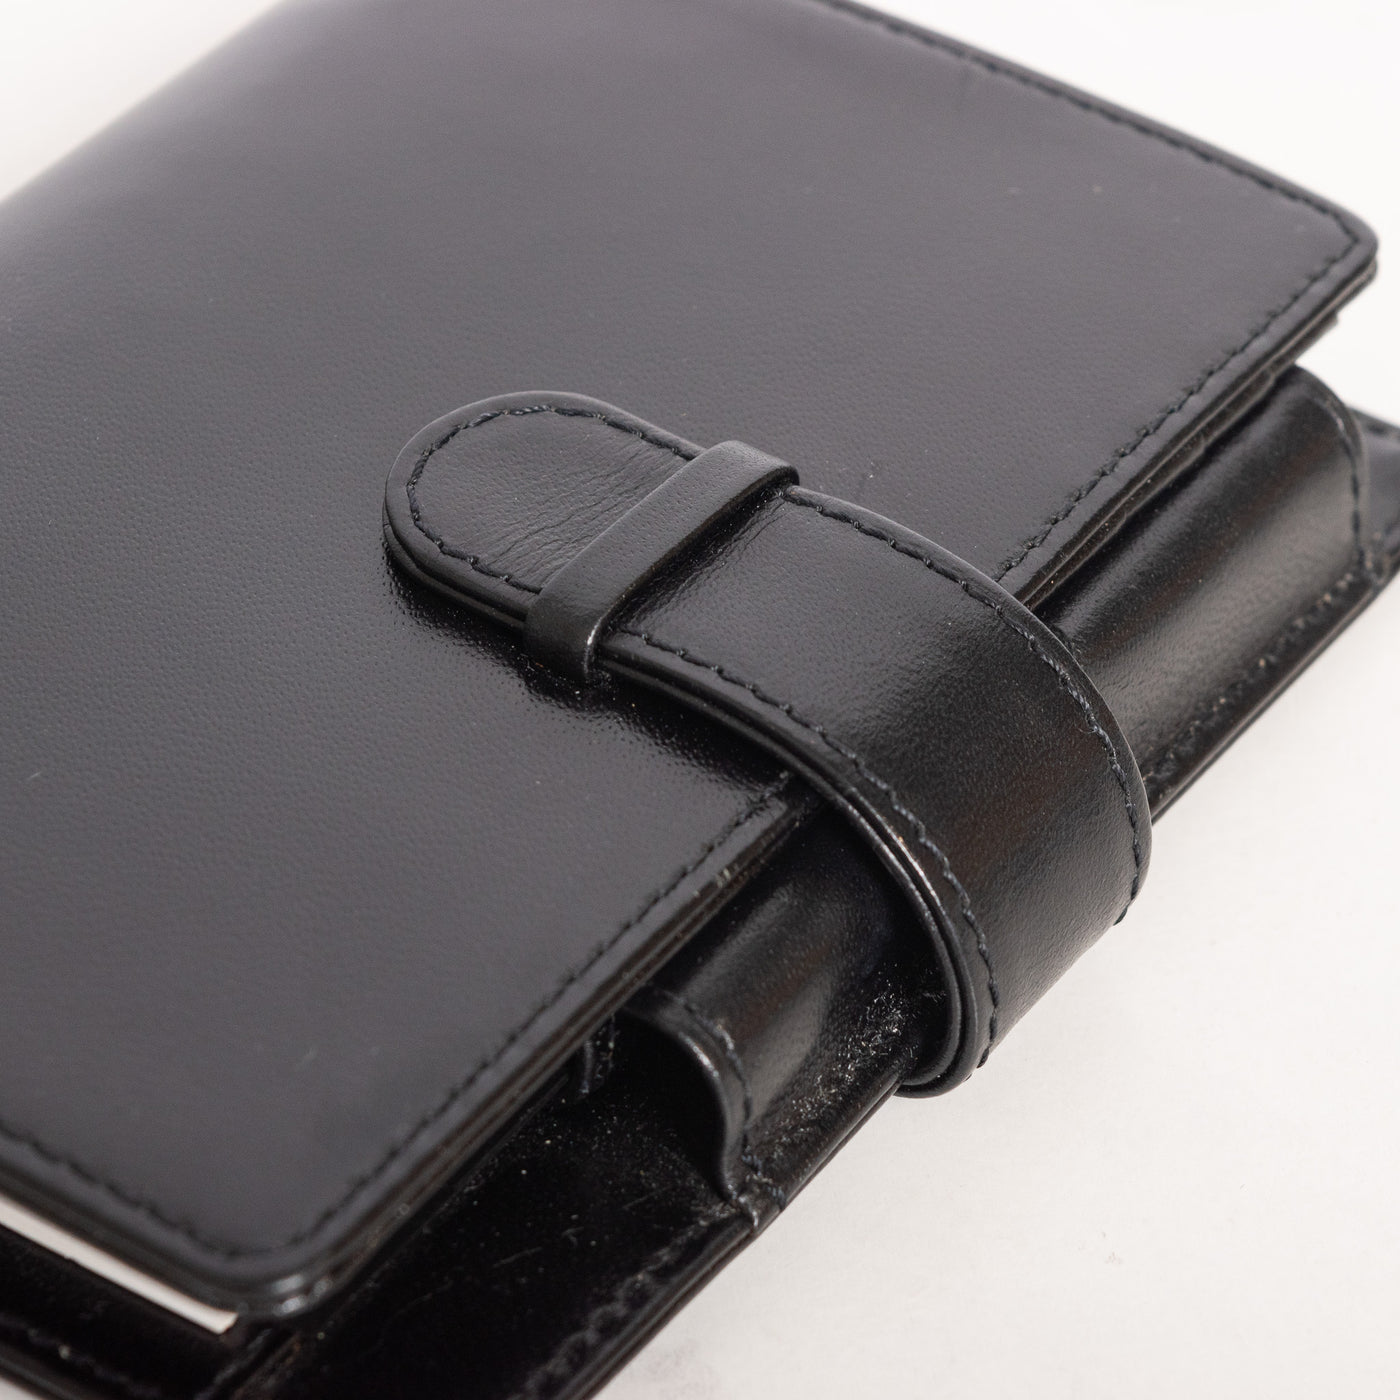 Montblanc Leather Goods Meisterstuck A7 Black Leather Pocket Organizer 14876 - Preowned Strap Detail